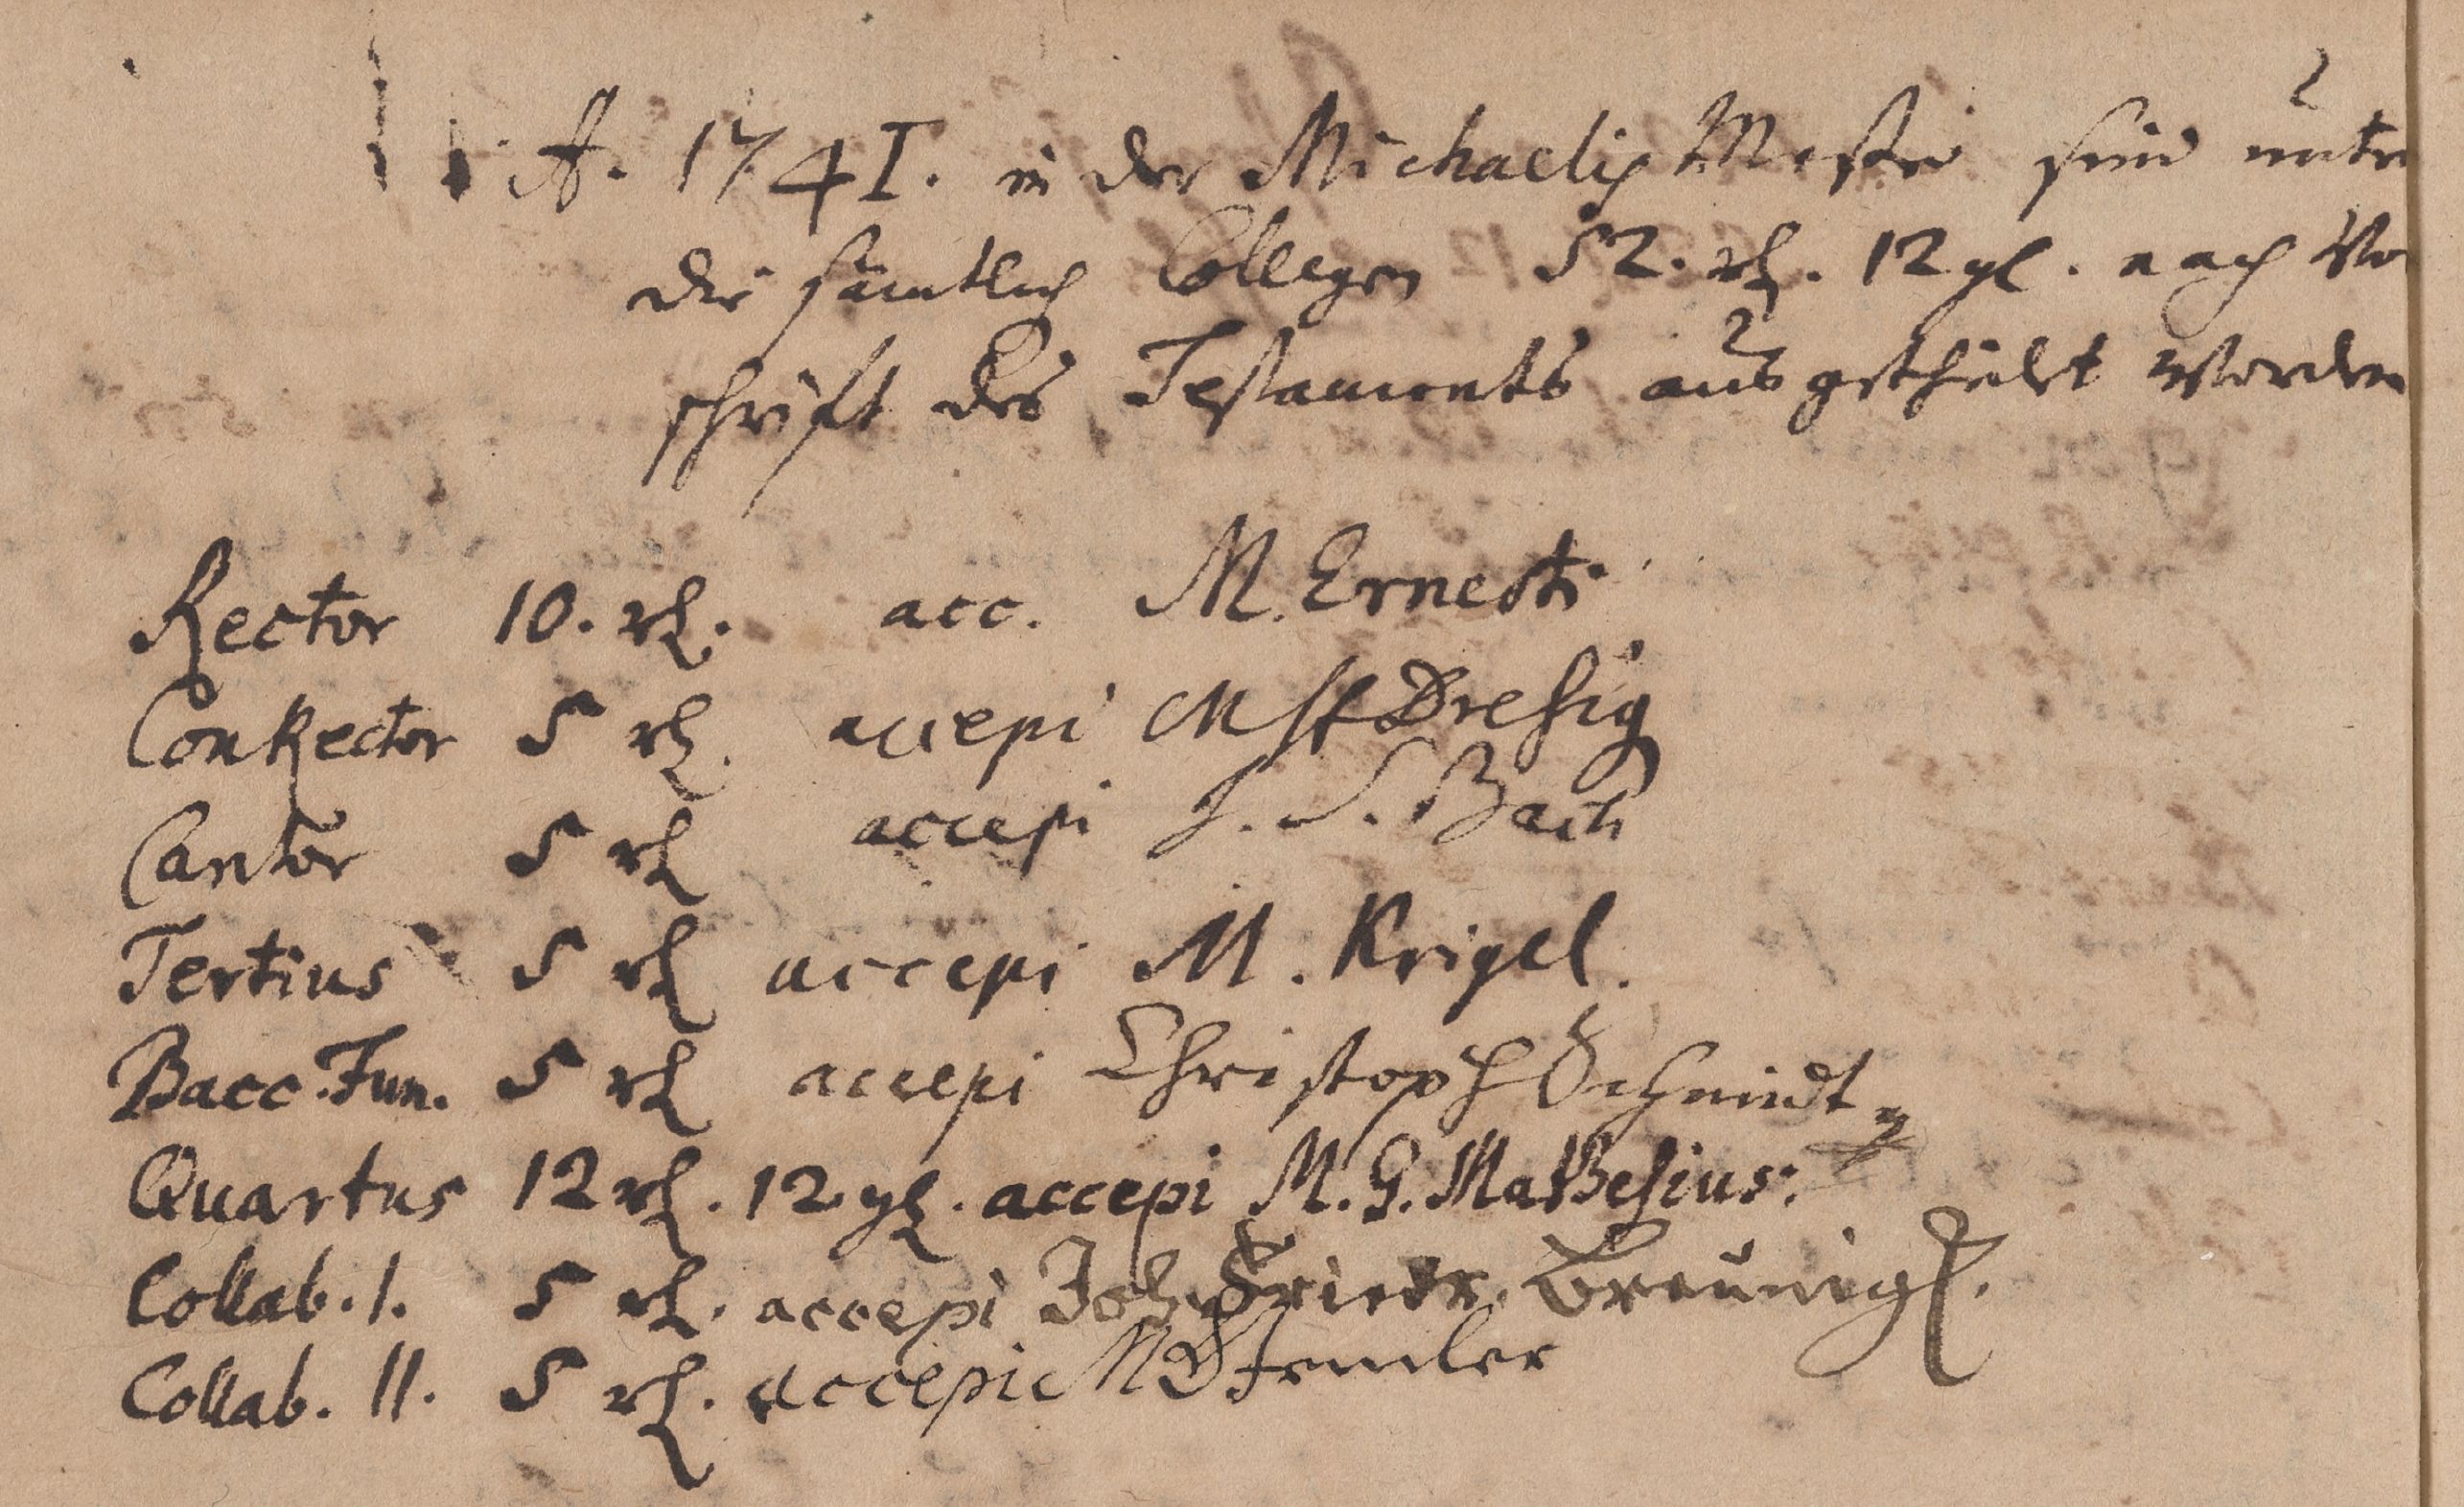 Entries in the Legacy of R. M. Sinner with Bach's signature (1741)